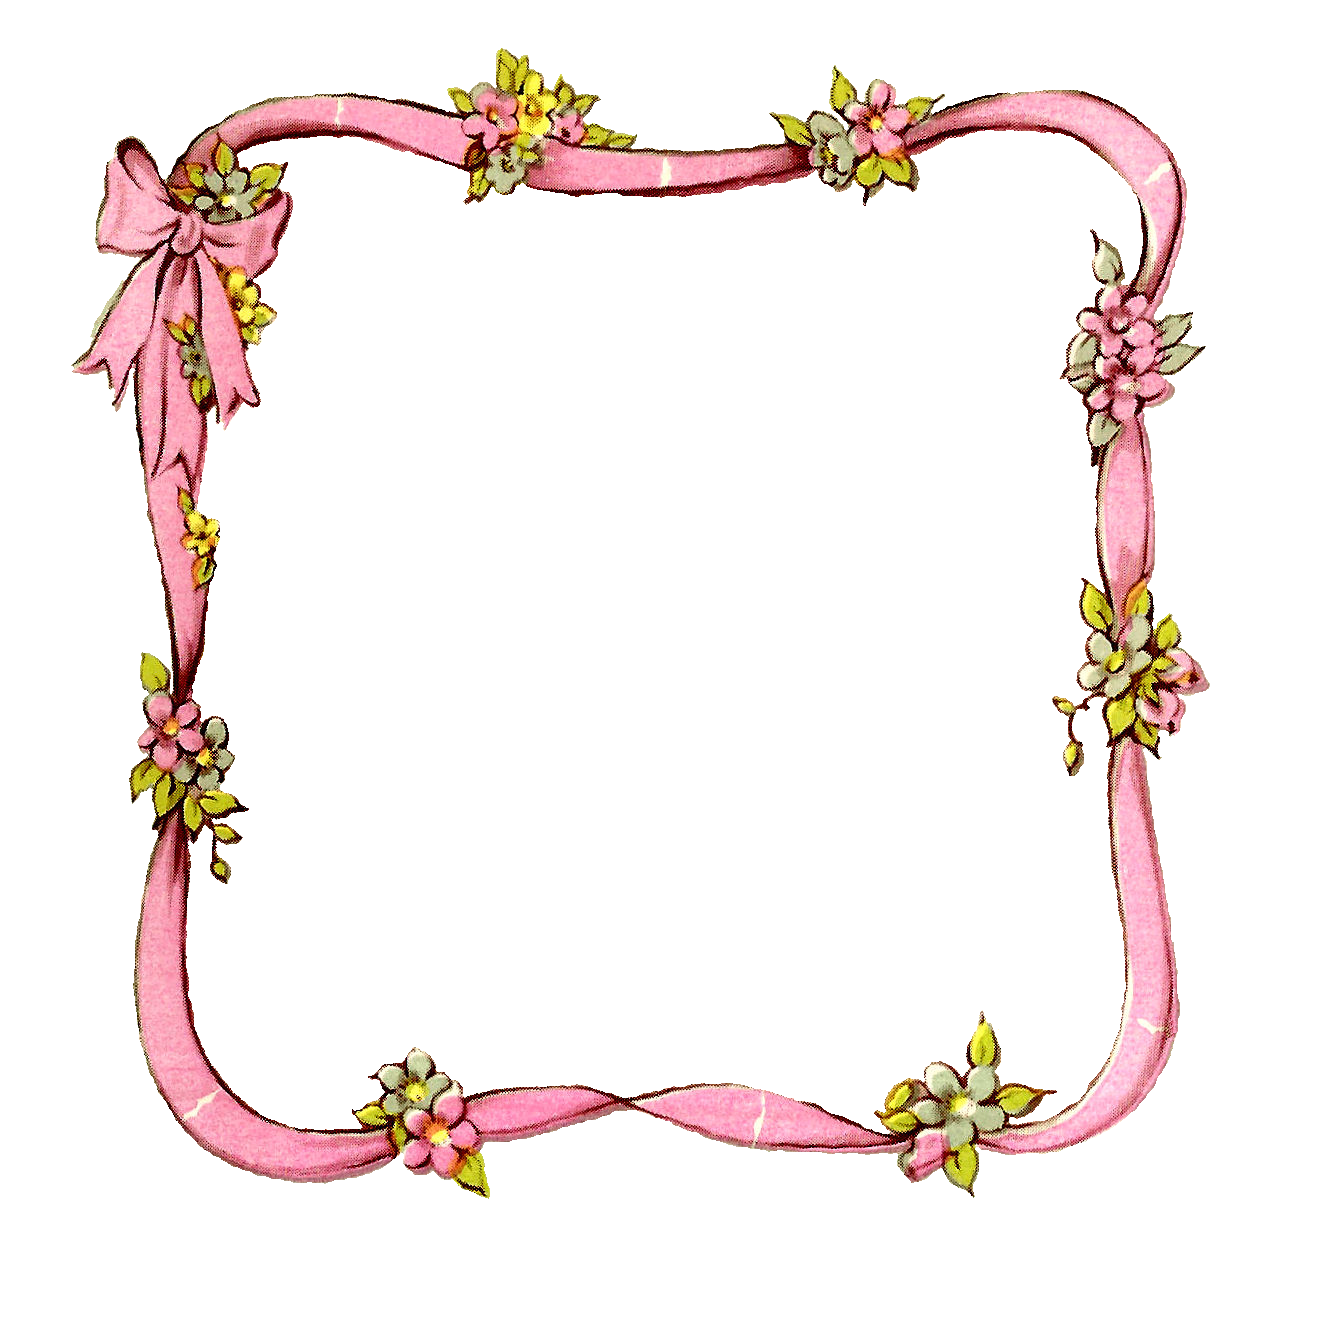 Flowers And Ribbon Transparent File